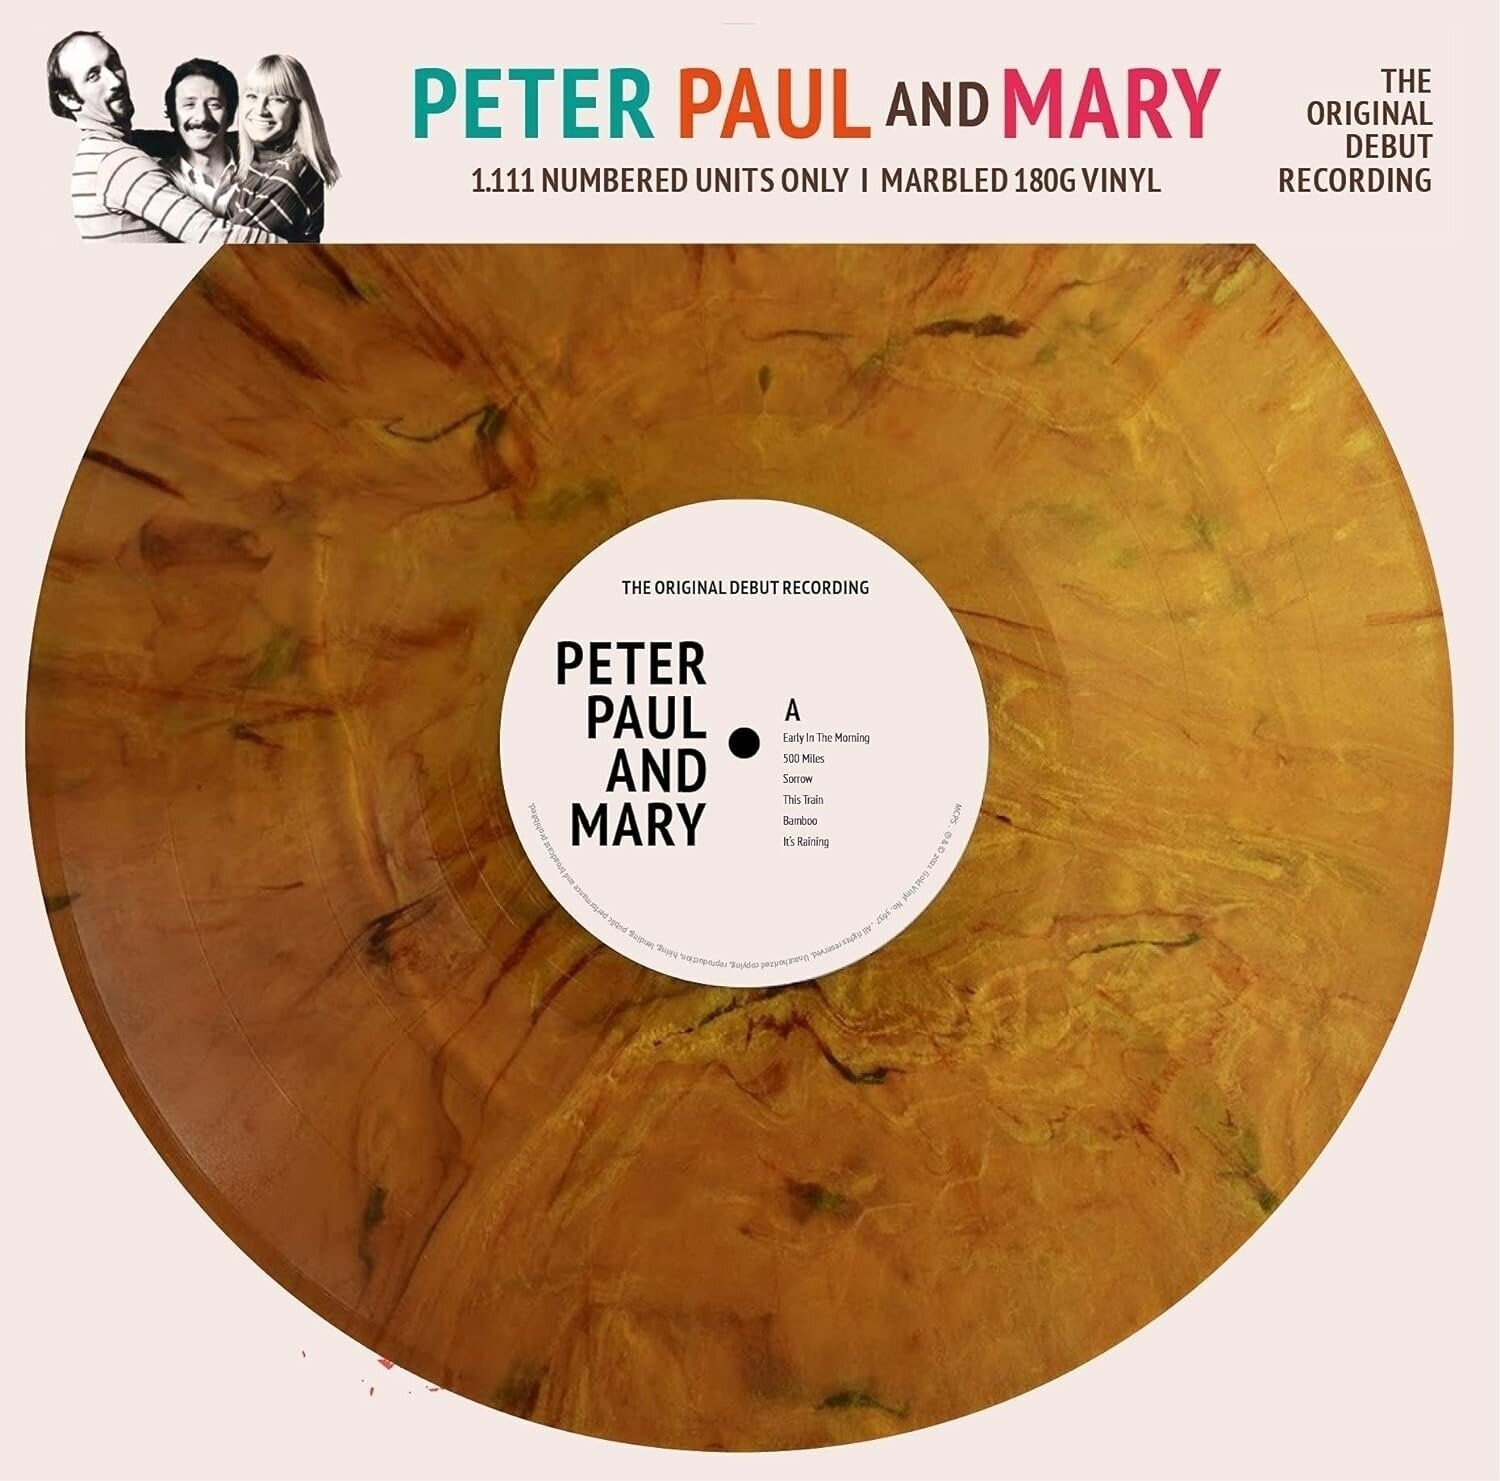 Disco de vinil Peter, Paul and Mary - The Original Debut Recording (Limited Edition) (Numbered) (Gold Marbled Coloured) (LP)